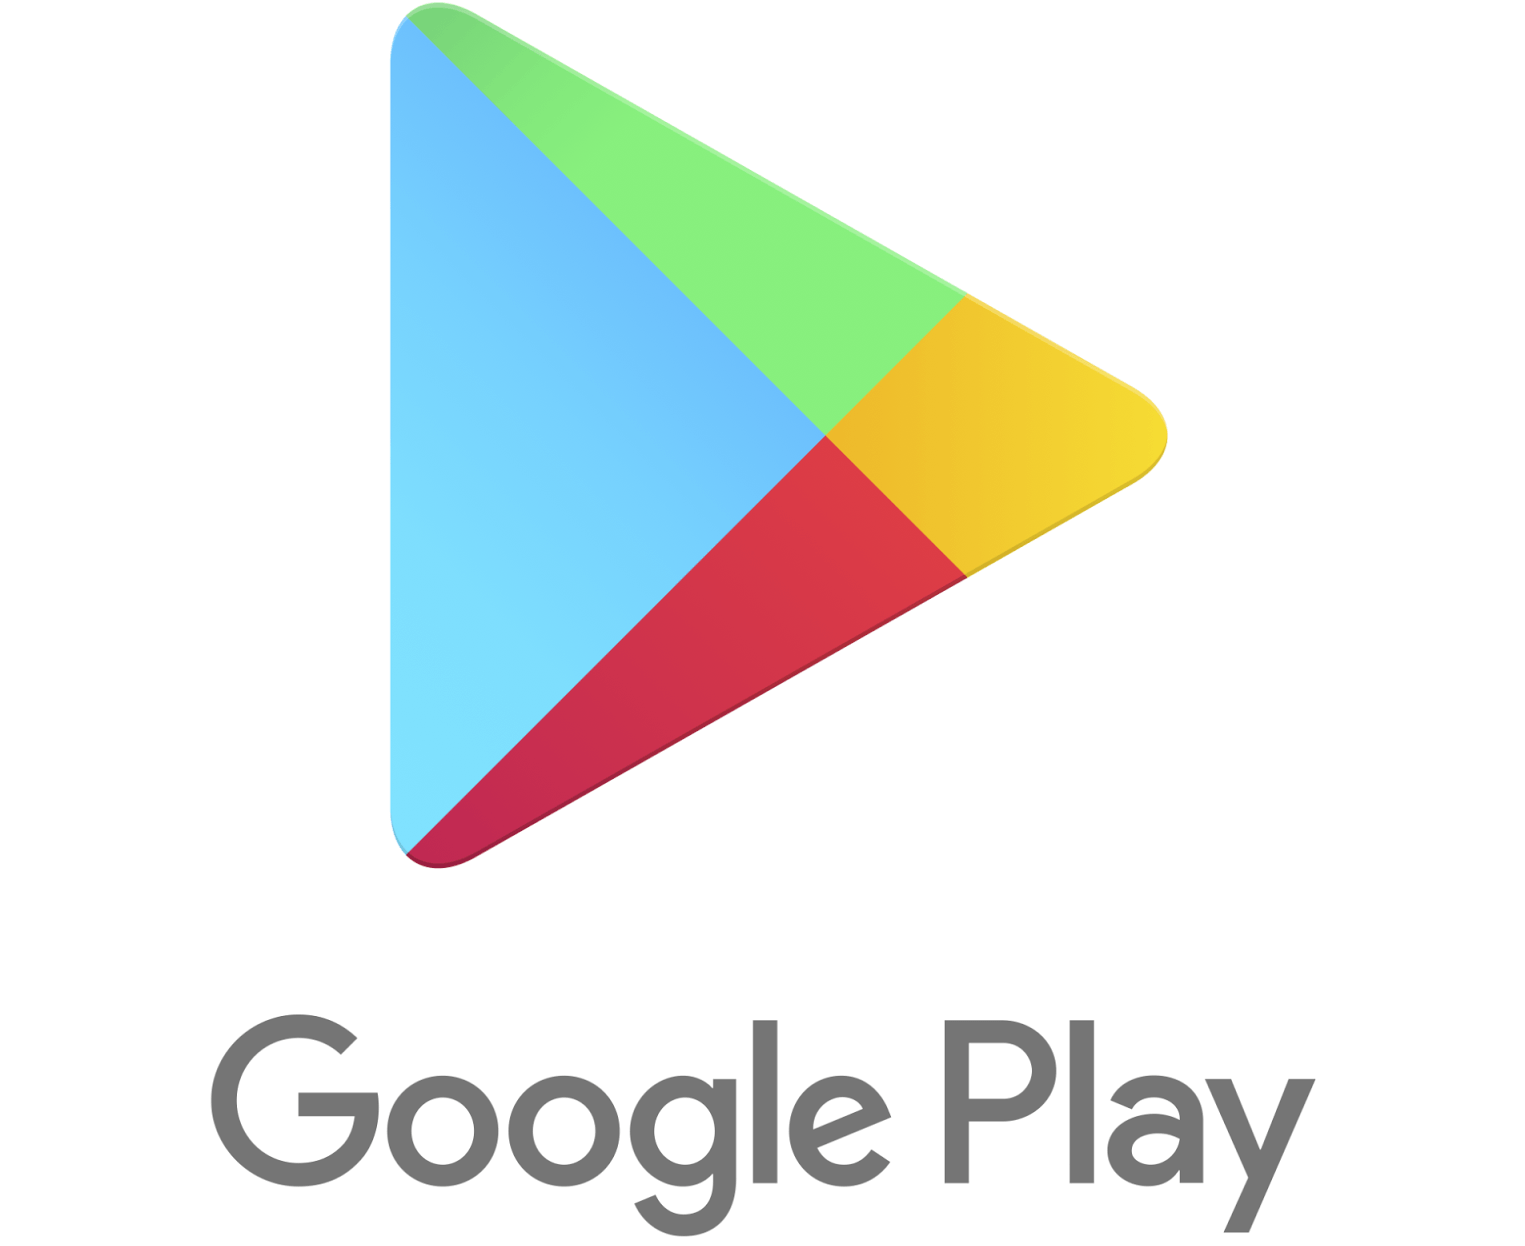 Google Play App Logo - Google Play Store picks up a new icon and notifications ...